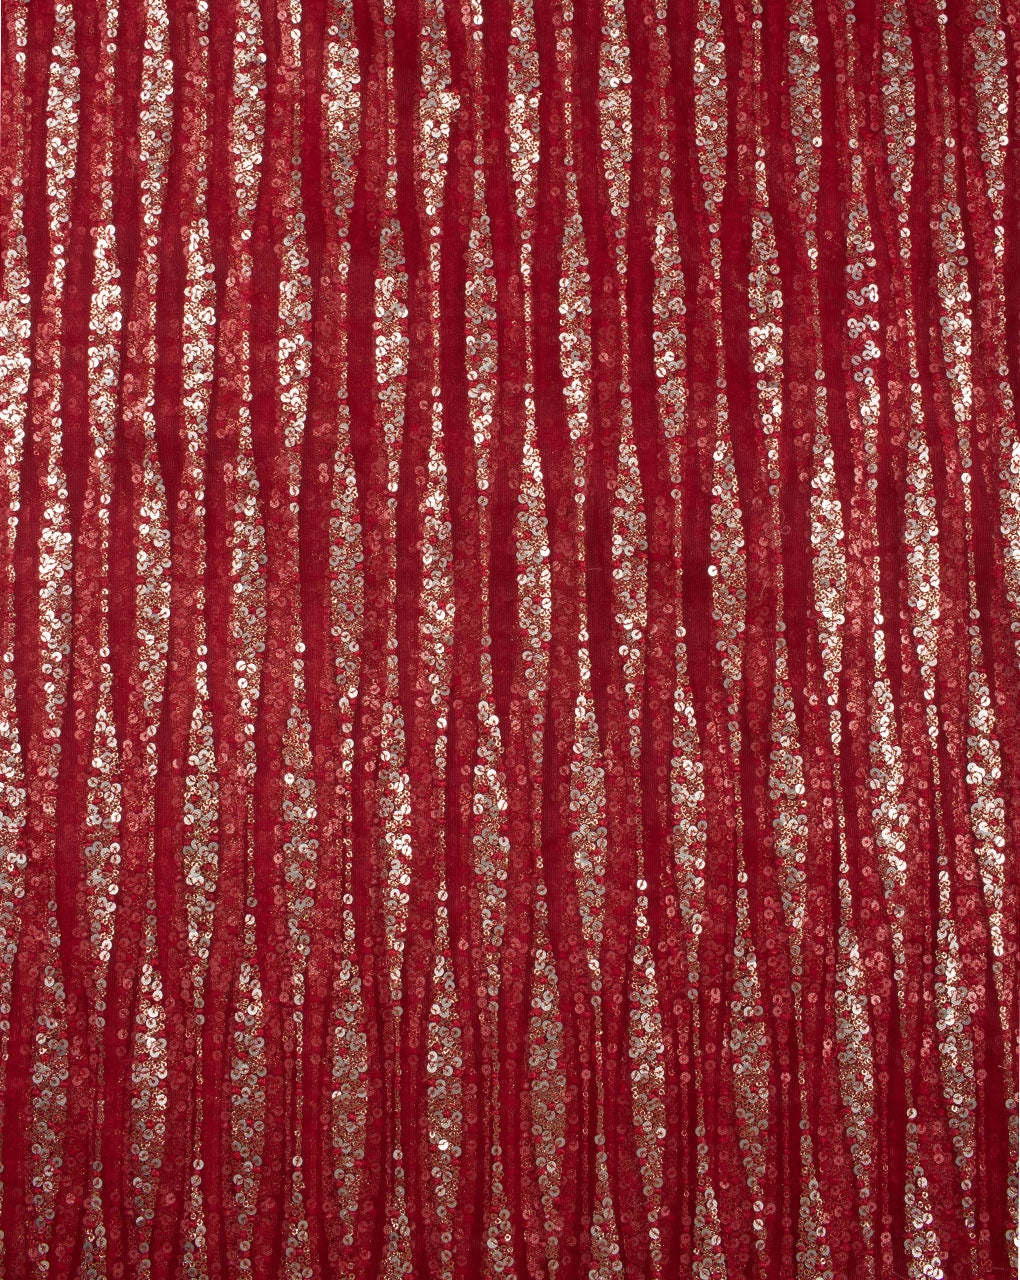 Embroidered Sequins Work Net Fabric - Fabriclore.com